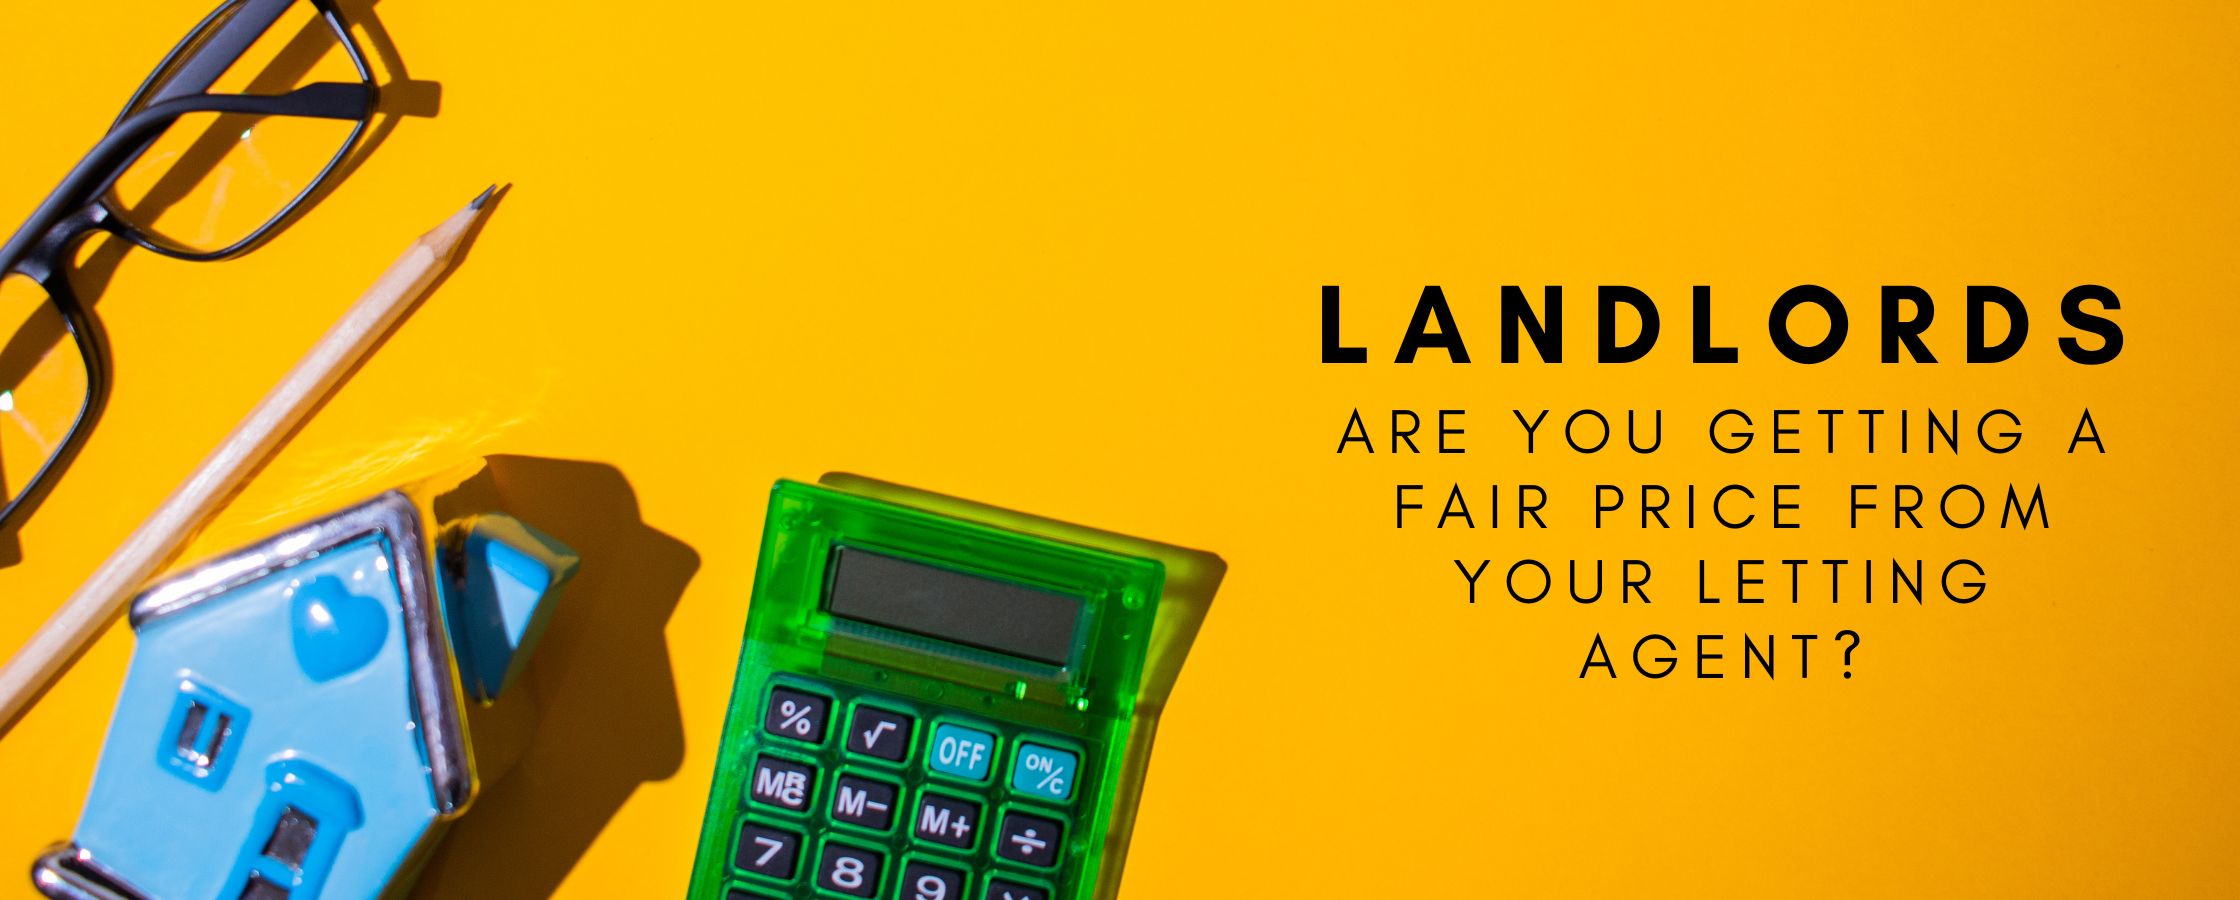 Landlords - do you think your current letting agent charges a fair price?